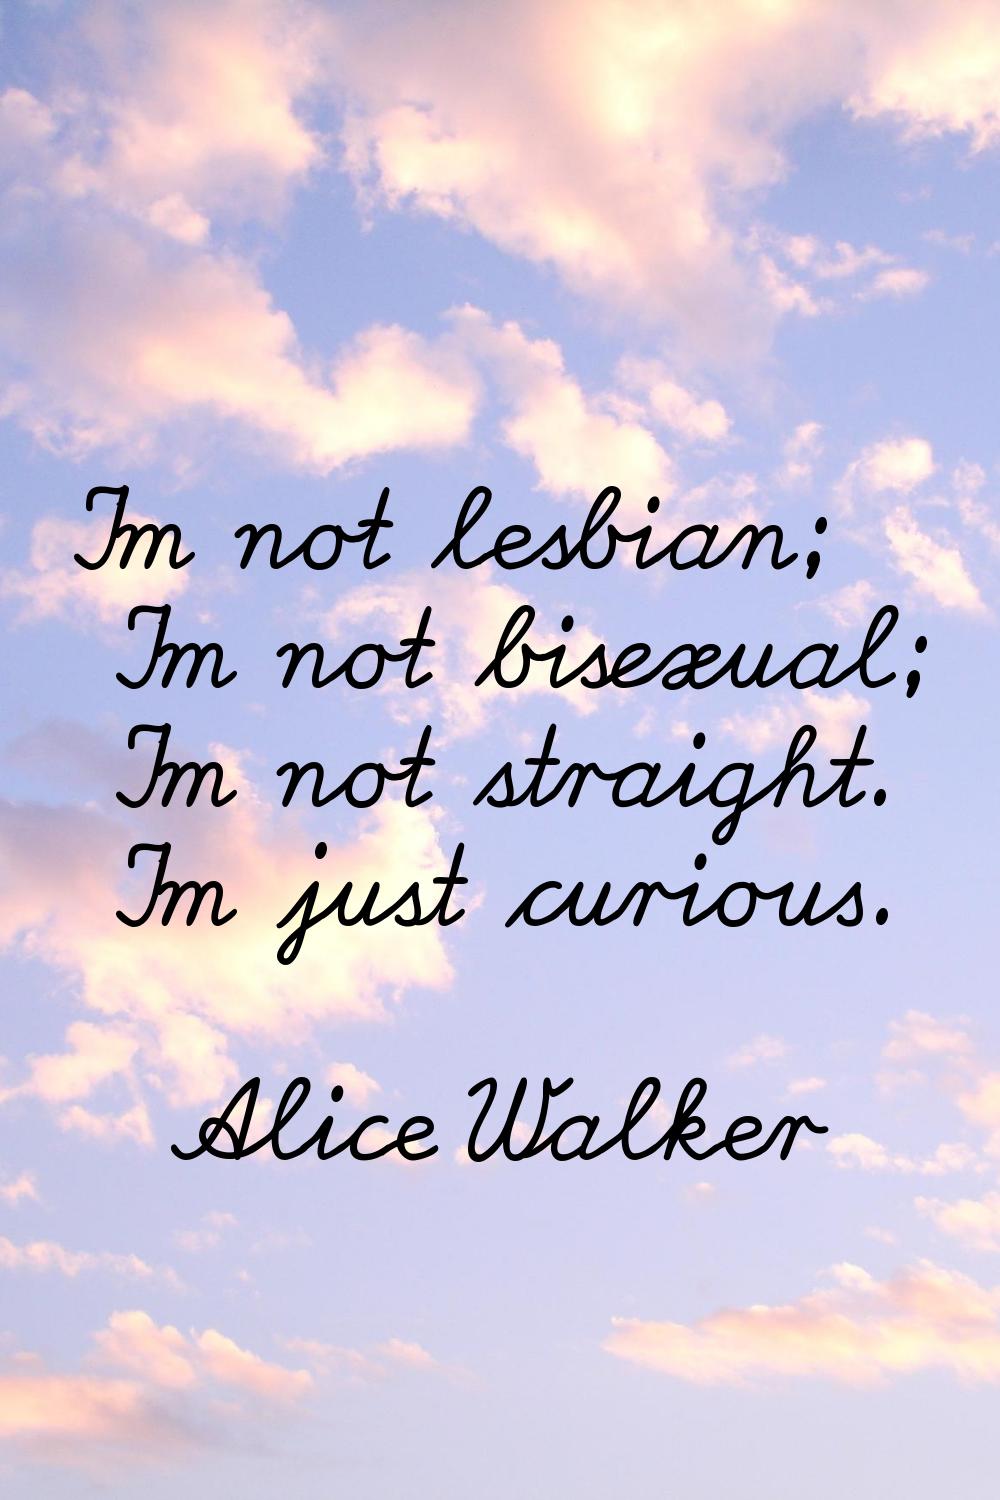 I'm not lesbian; I'm not bisexual; I'm not straight. I'm just curious.